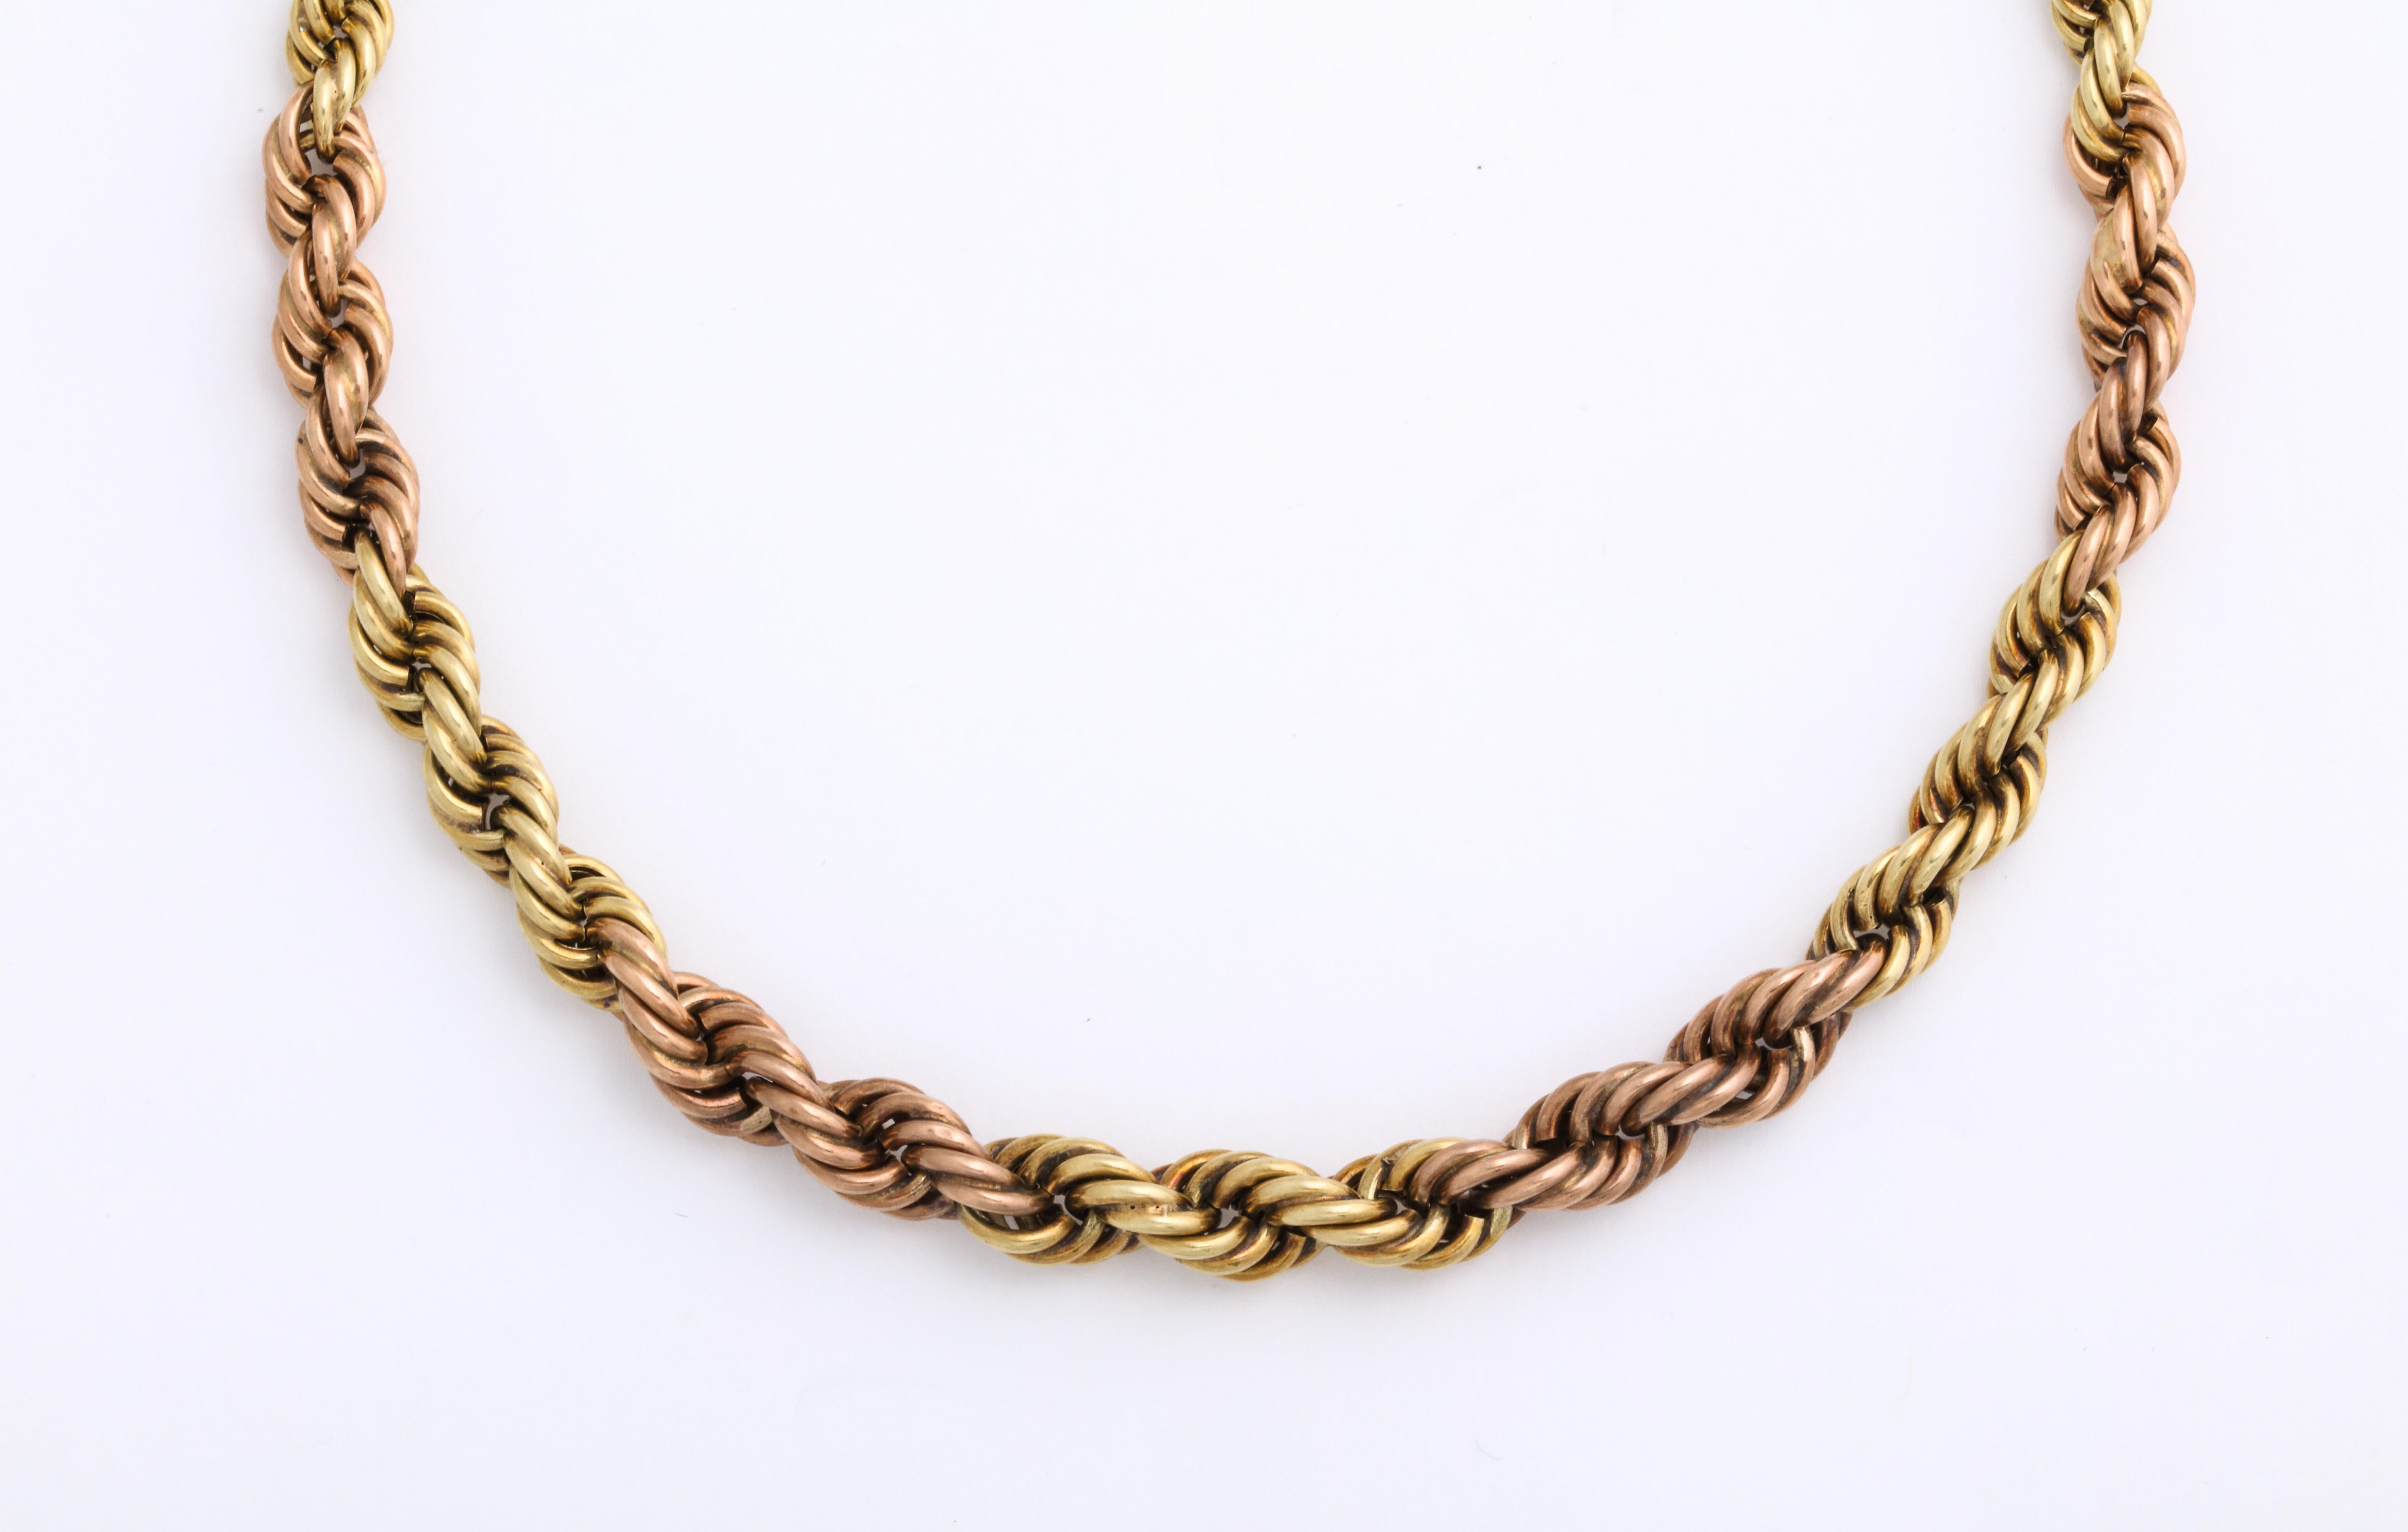 Women's or Men's Vintage Classic Retro Gold Braided Chain 